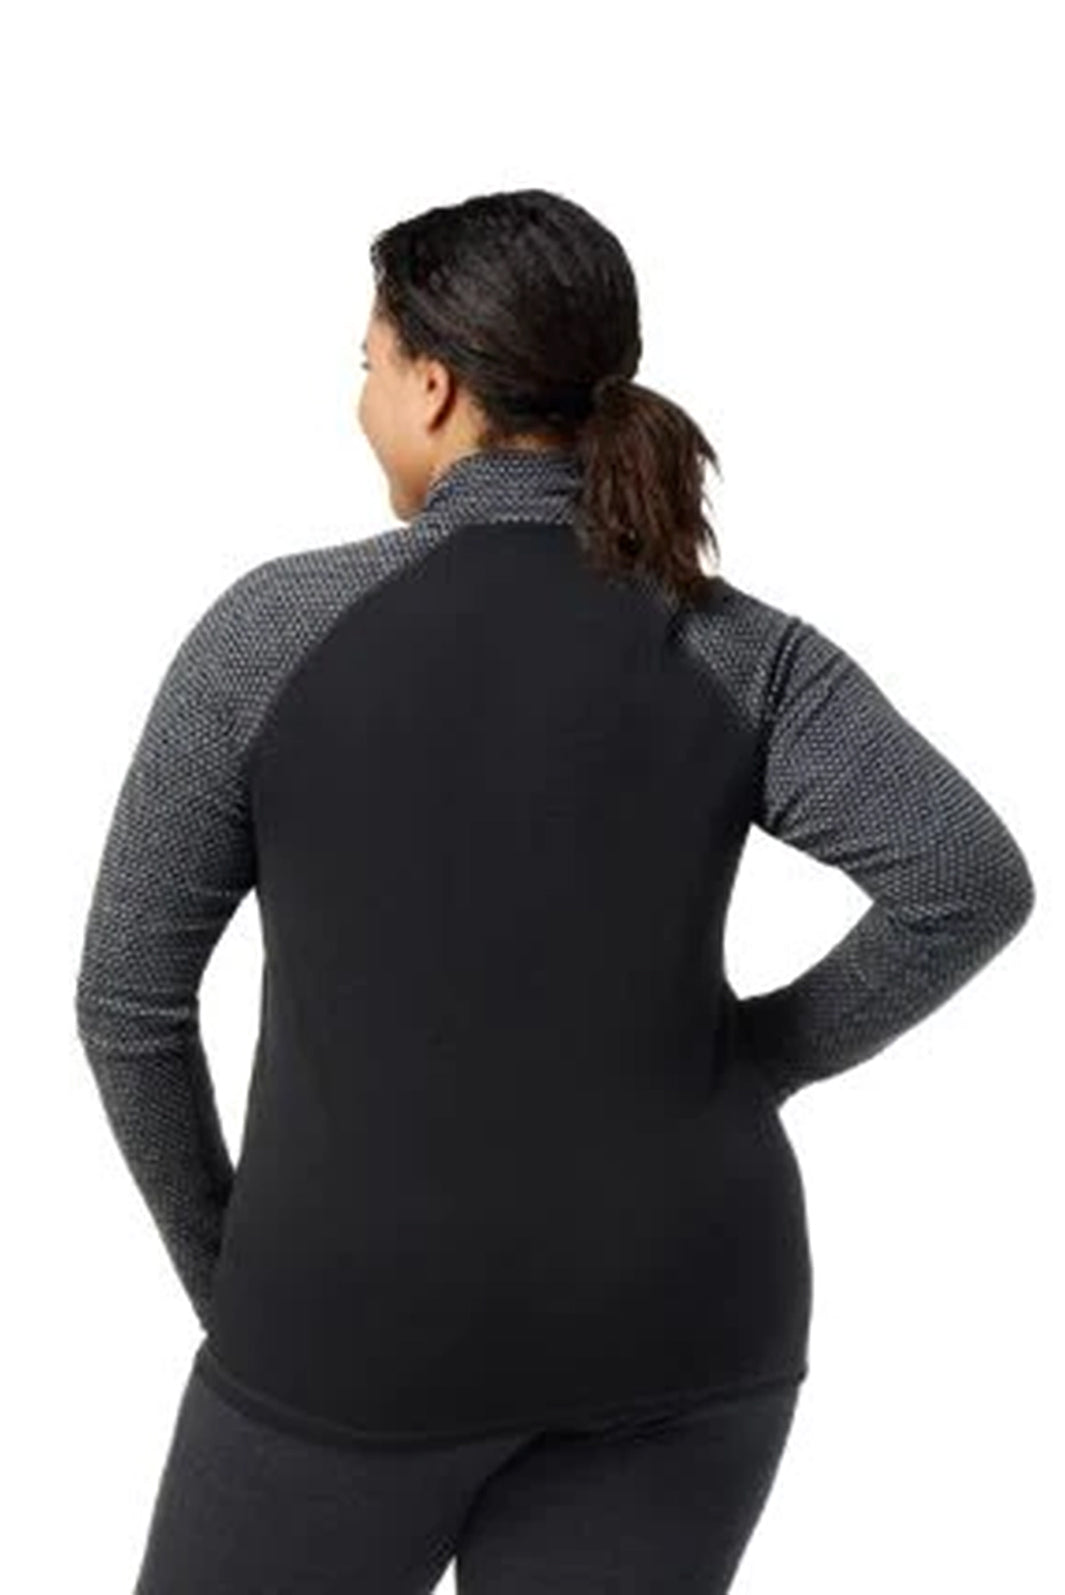 Smartwool Plus Size 1/4 Zip Patterned Sweater Base Layer 